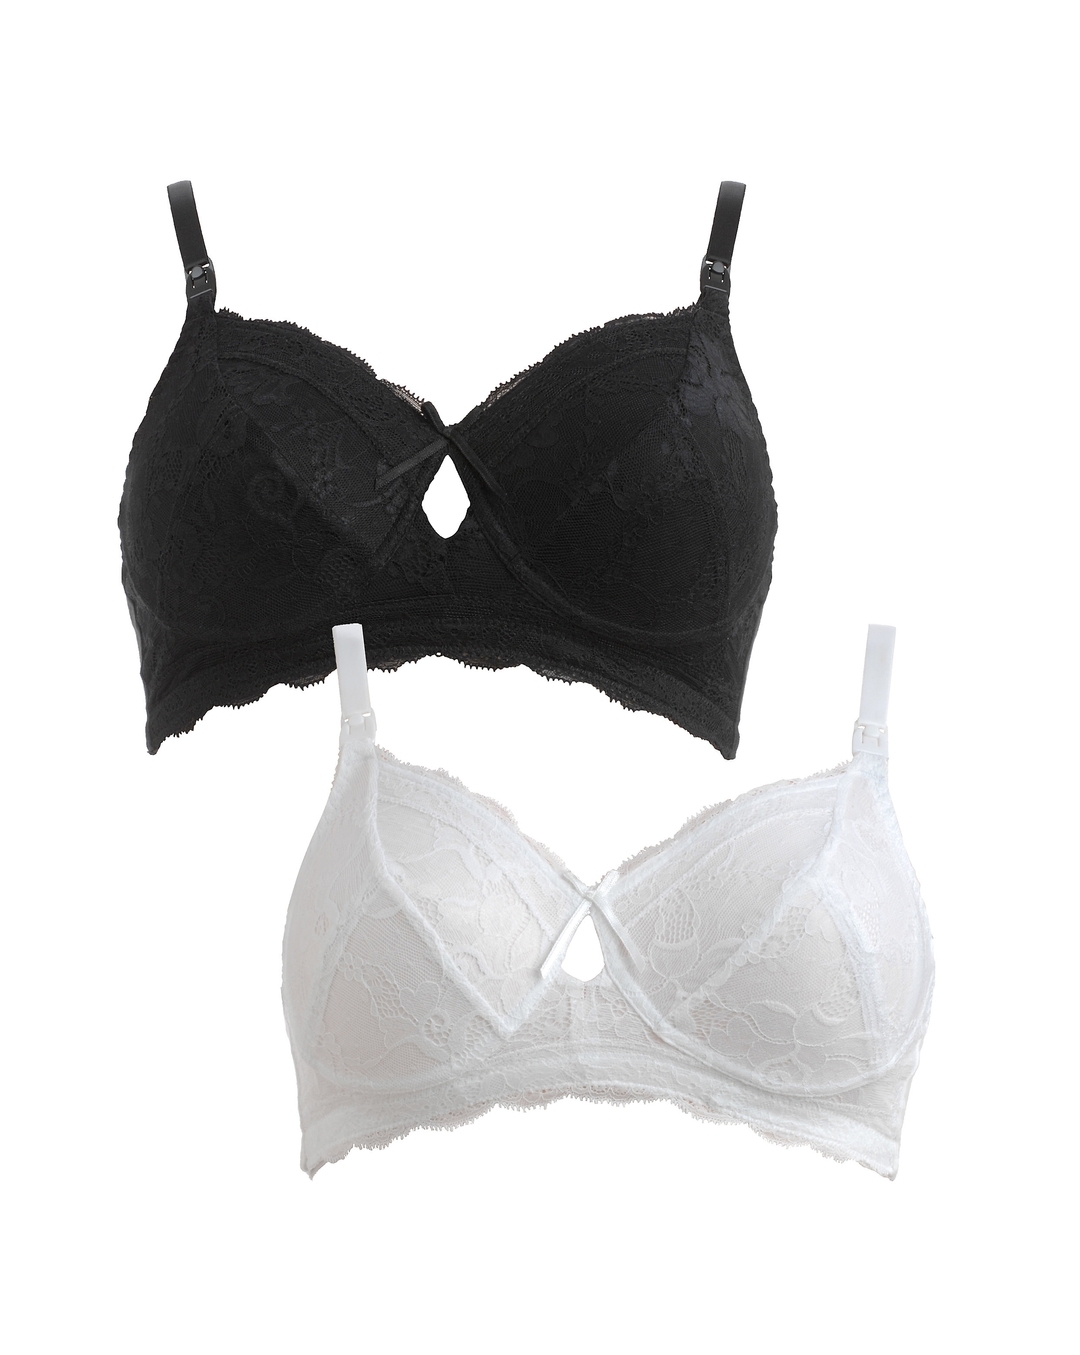 black and nude smoothing nursing t-shirt bra - 2 pack - Blooming Marvellous